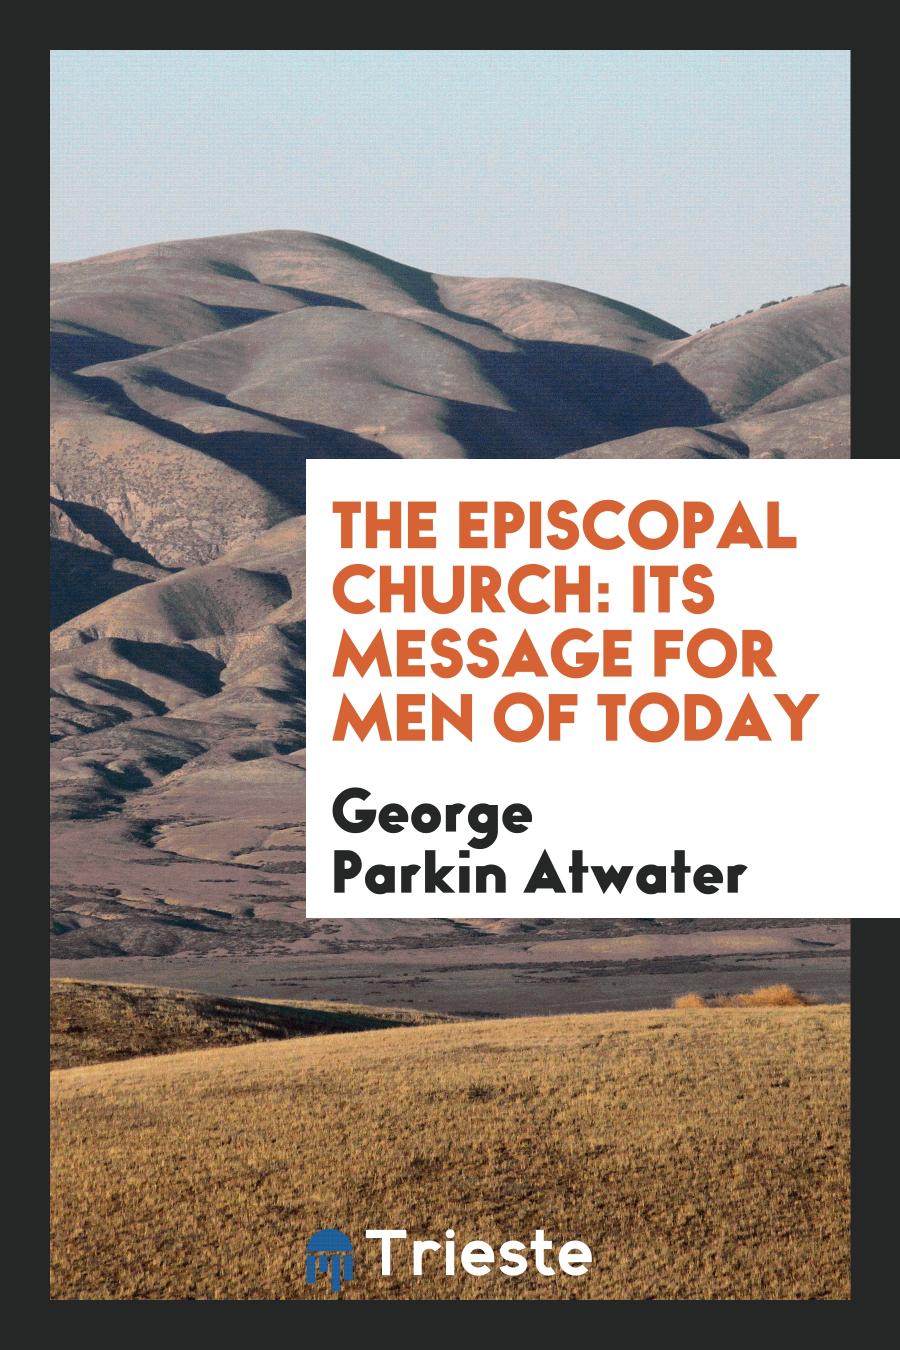 George Parkin Atwater - The Episcopal Church: Its Message for Men of Today